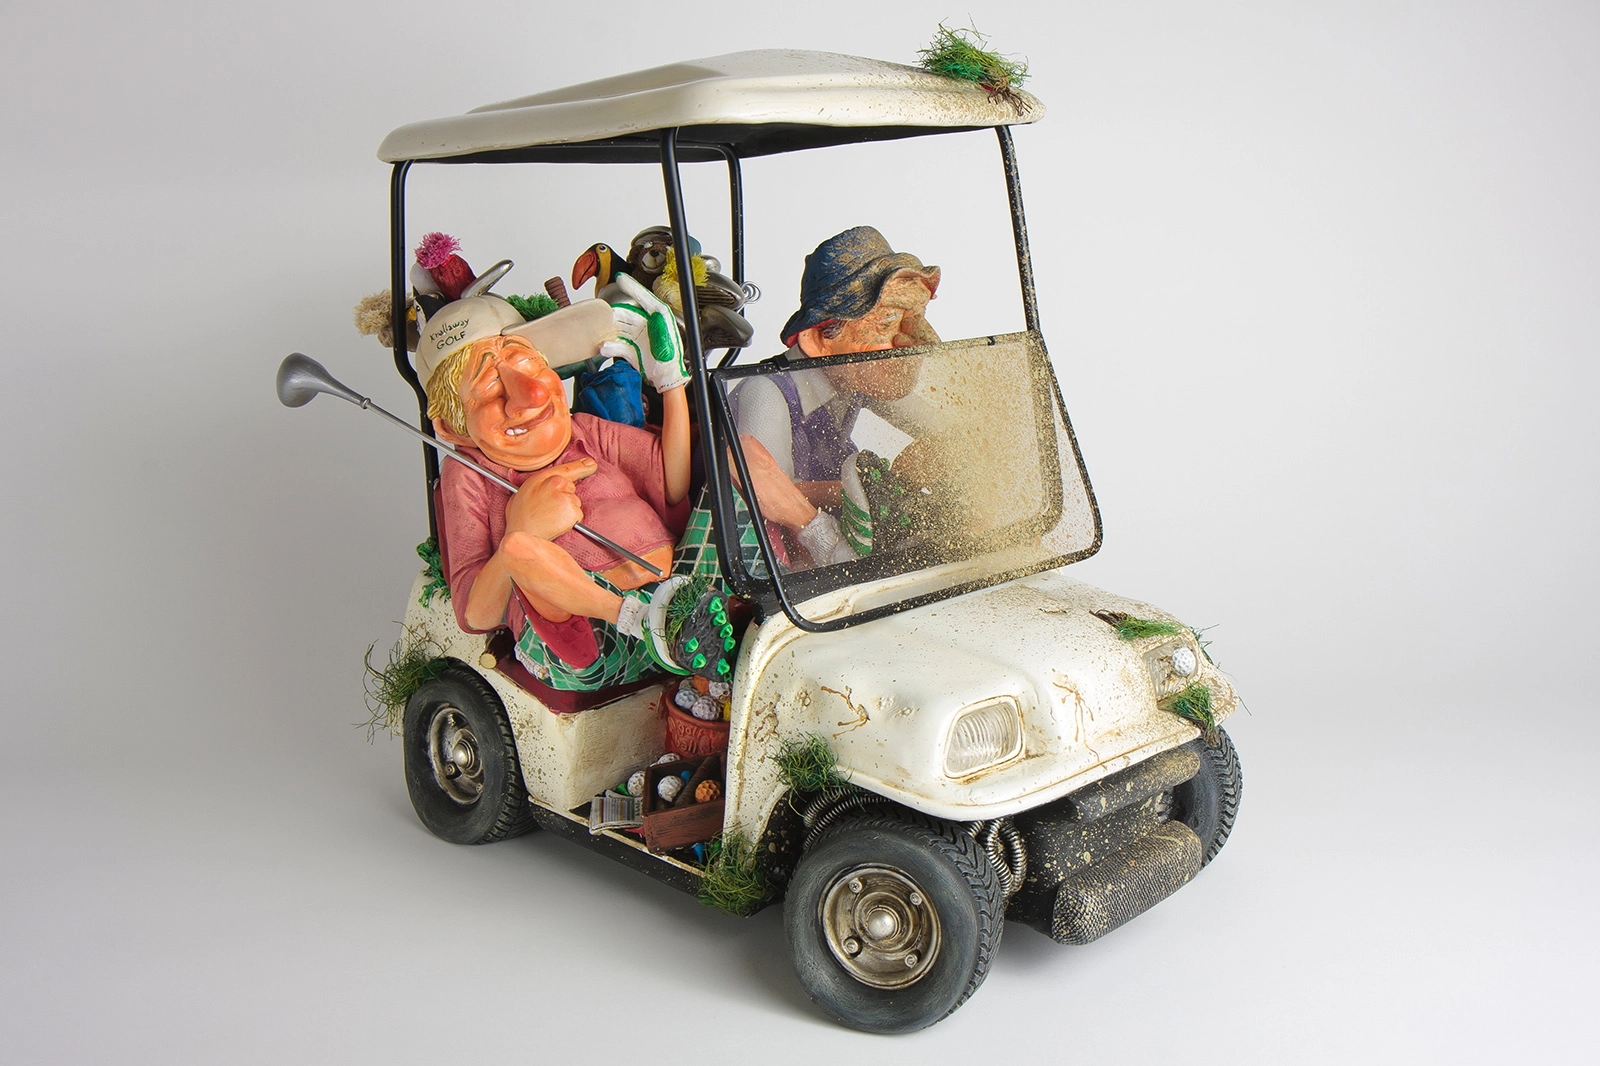 Guillermo Forchino The Buggy Buddies Comical Art Sculpture